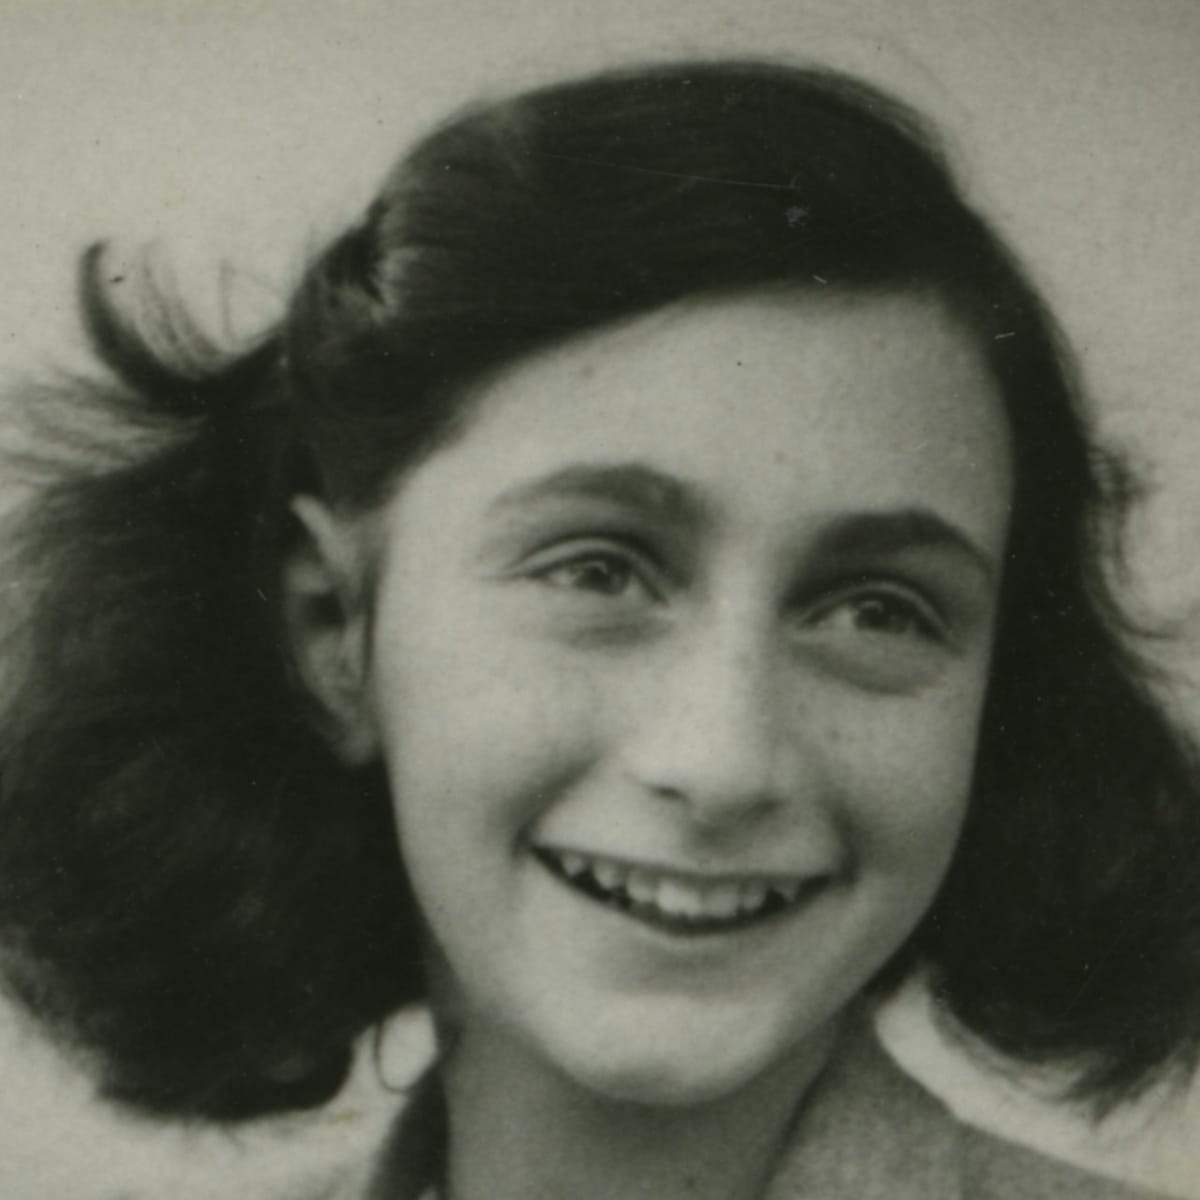 amsterdam-anne-frank-small-group-guided-tour-vr-experience_1